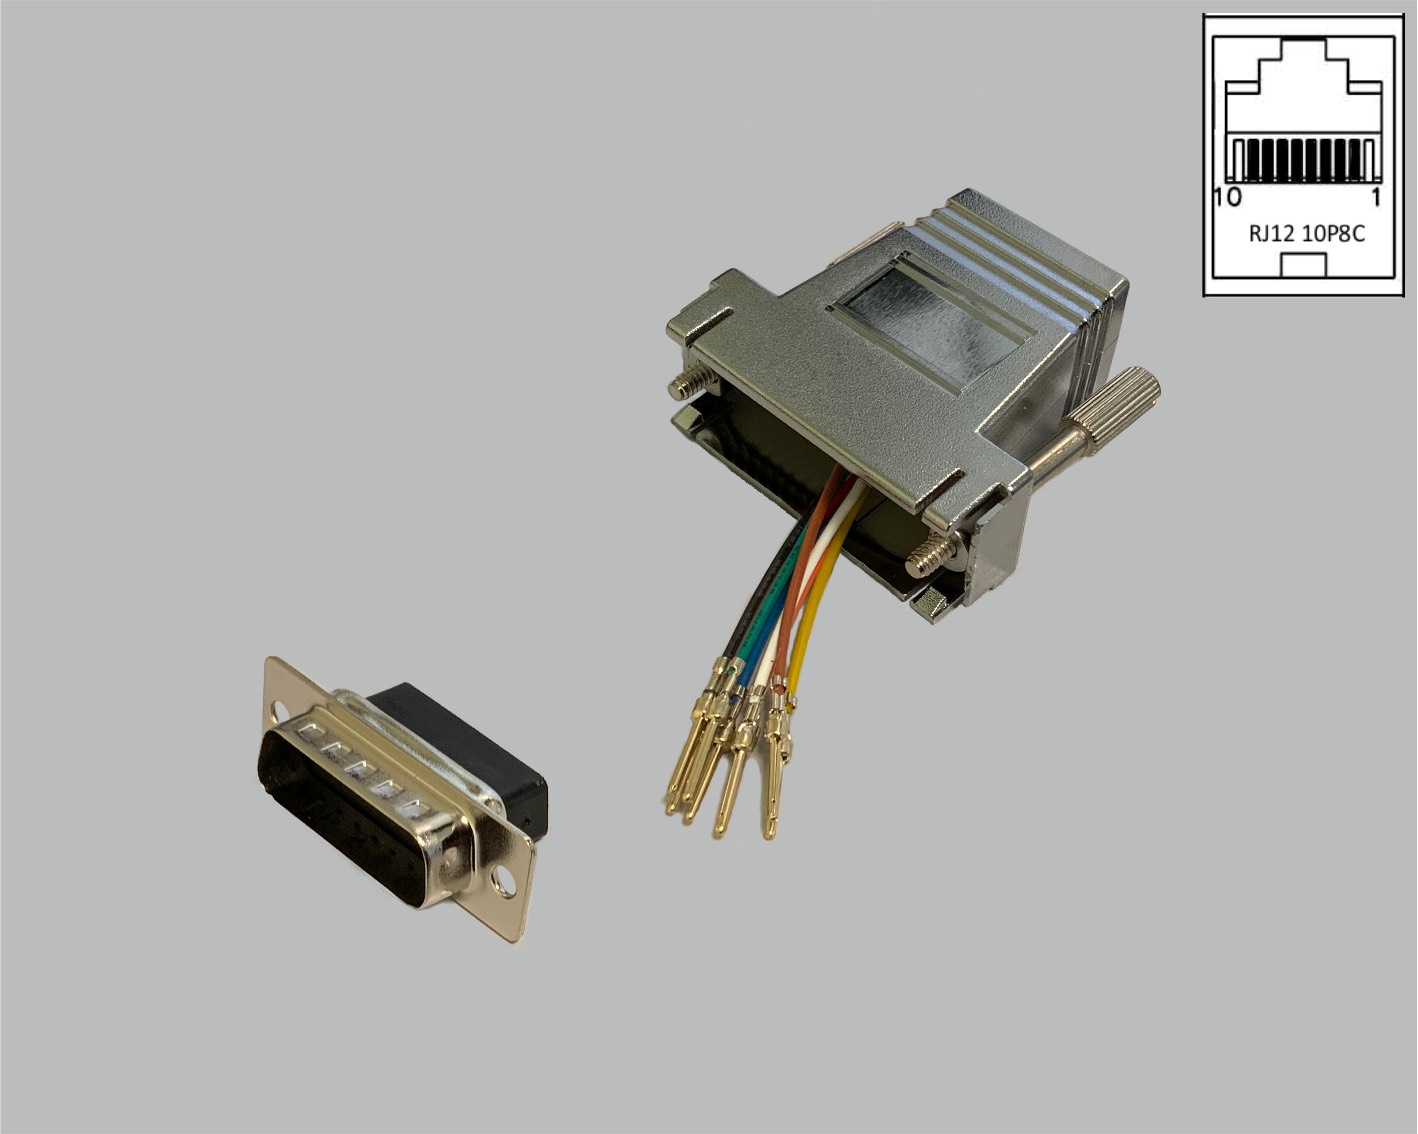 D-Sub/RJ adapter, freely configurable, D-Sub male connector 15-pin to RJ45 (10P8C) female connector, metallised